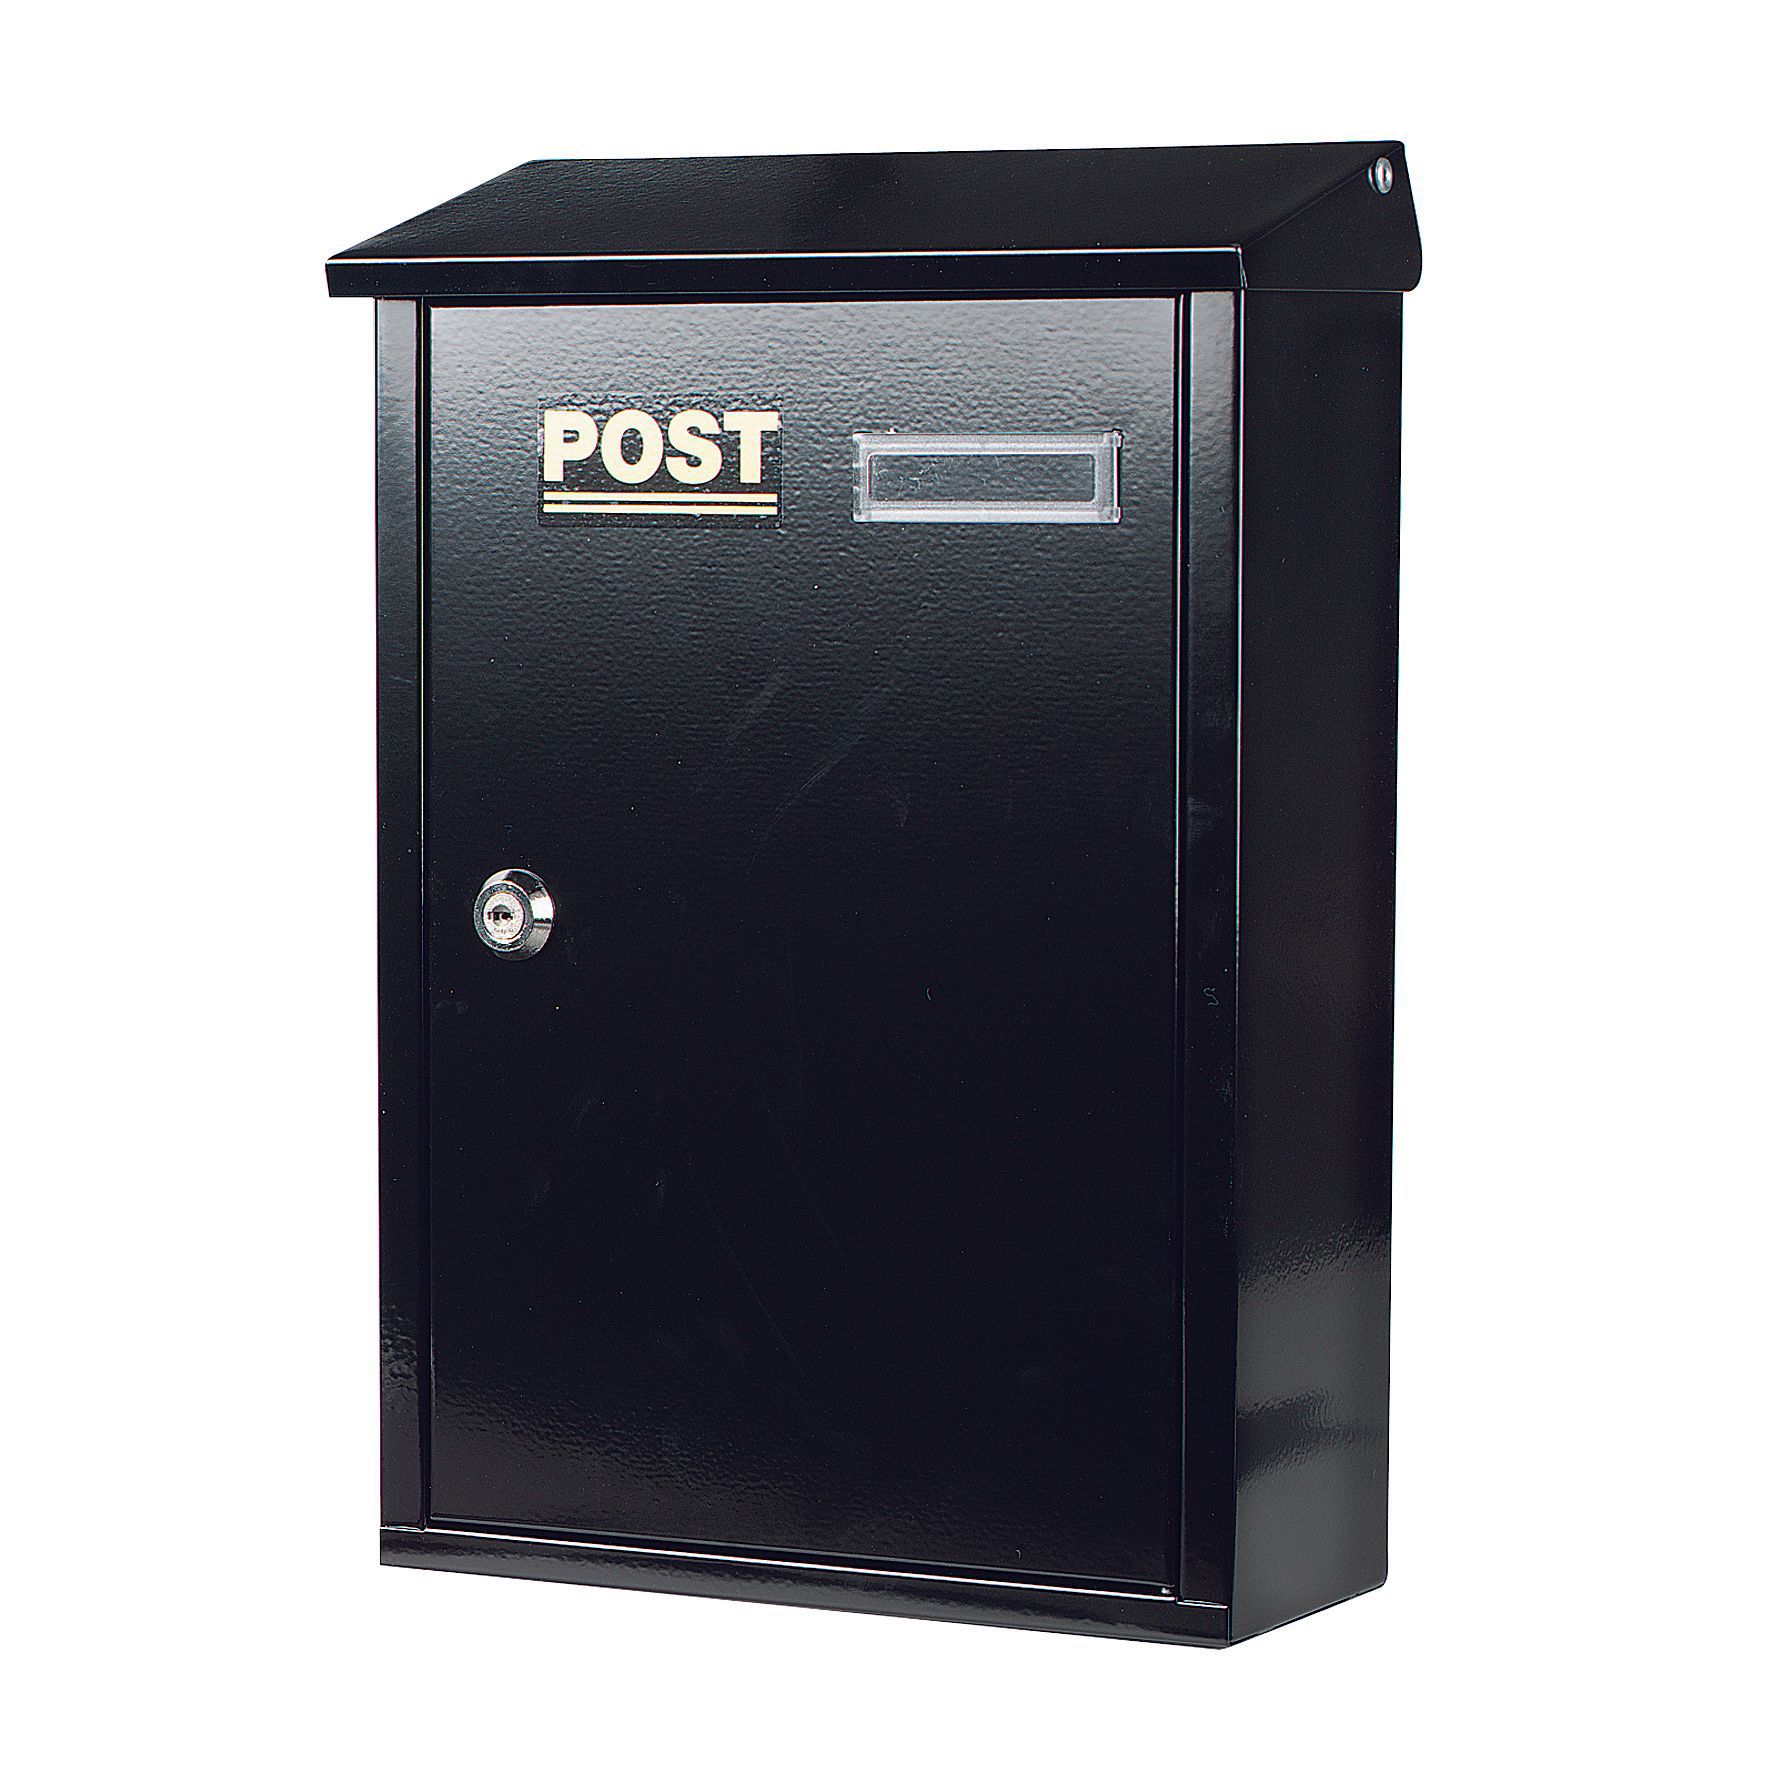 The House Nameplate Company Post box